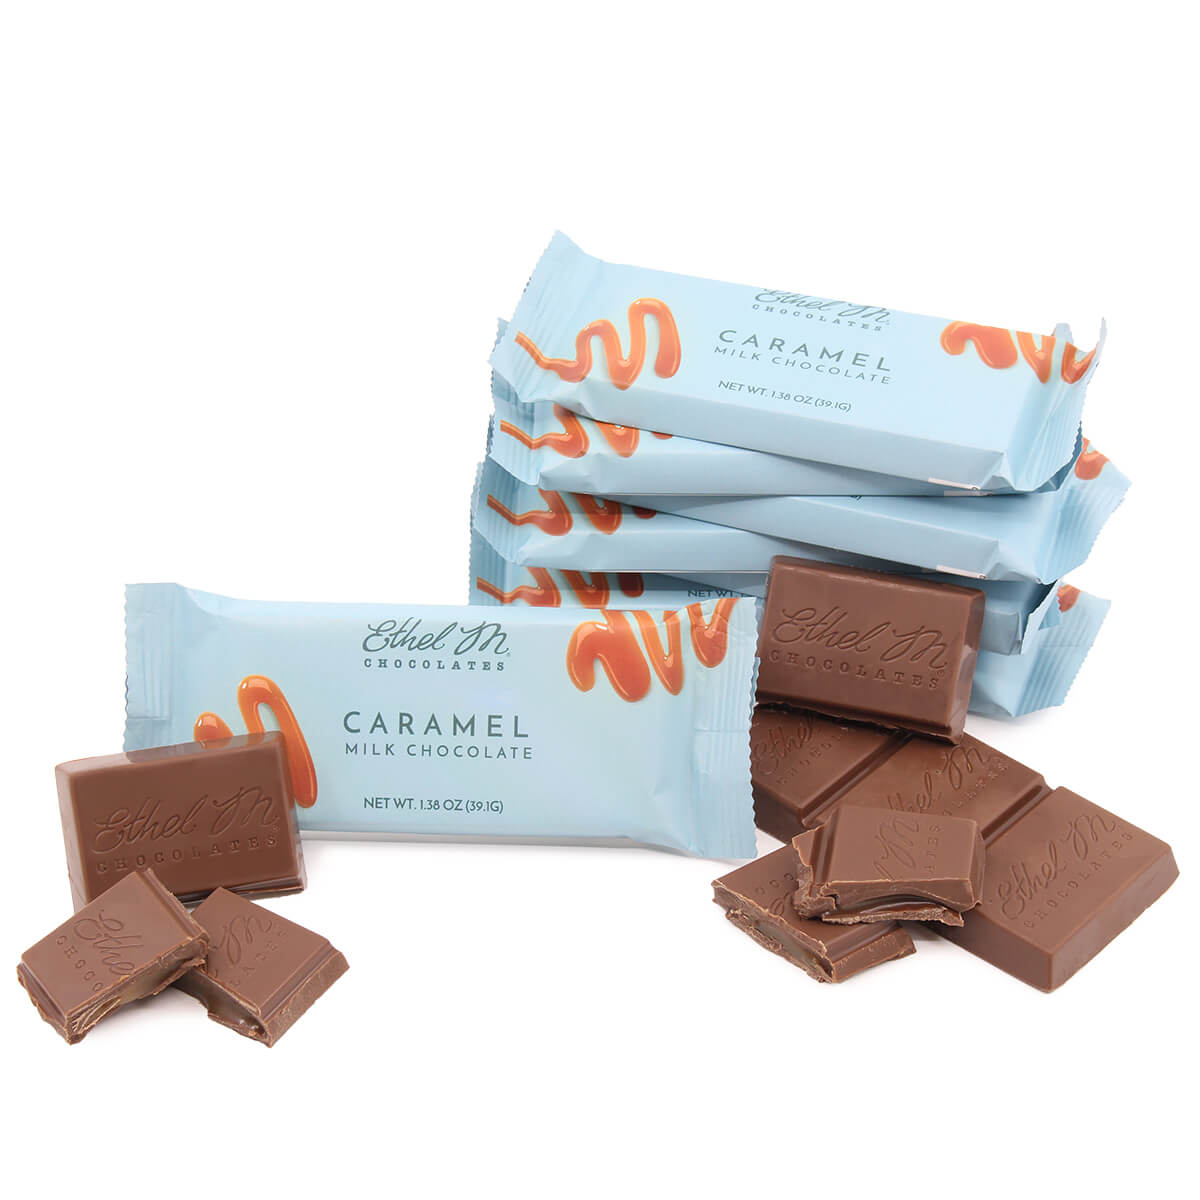 Sink your teeth into our very own Rich, Creamy and Delectable Ethel M Chocolates Caramel Milk Chocolate Bar.